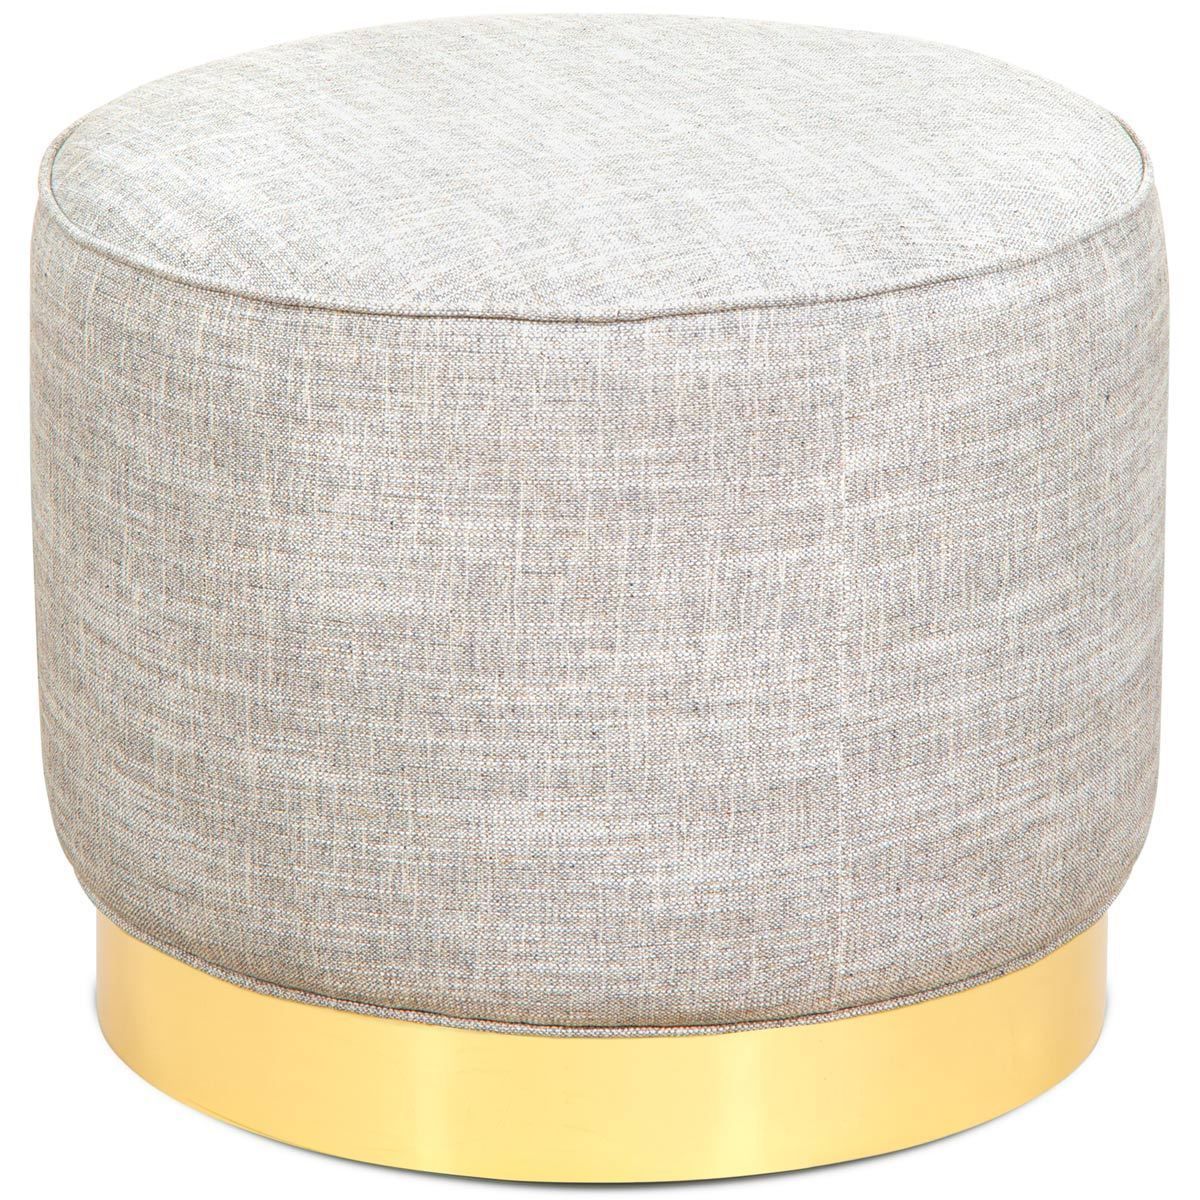 Pin On Ottomans/coffee Tables Throughout Blue Woven Viscose Square Pouf Ottomans (View 1 of 20)